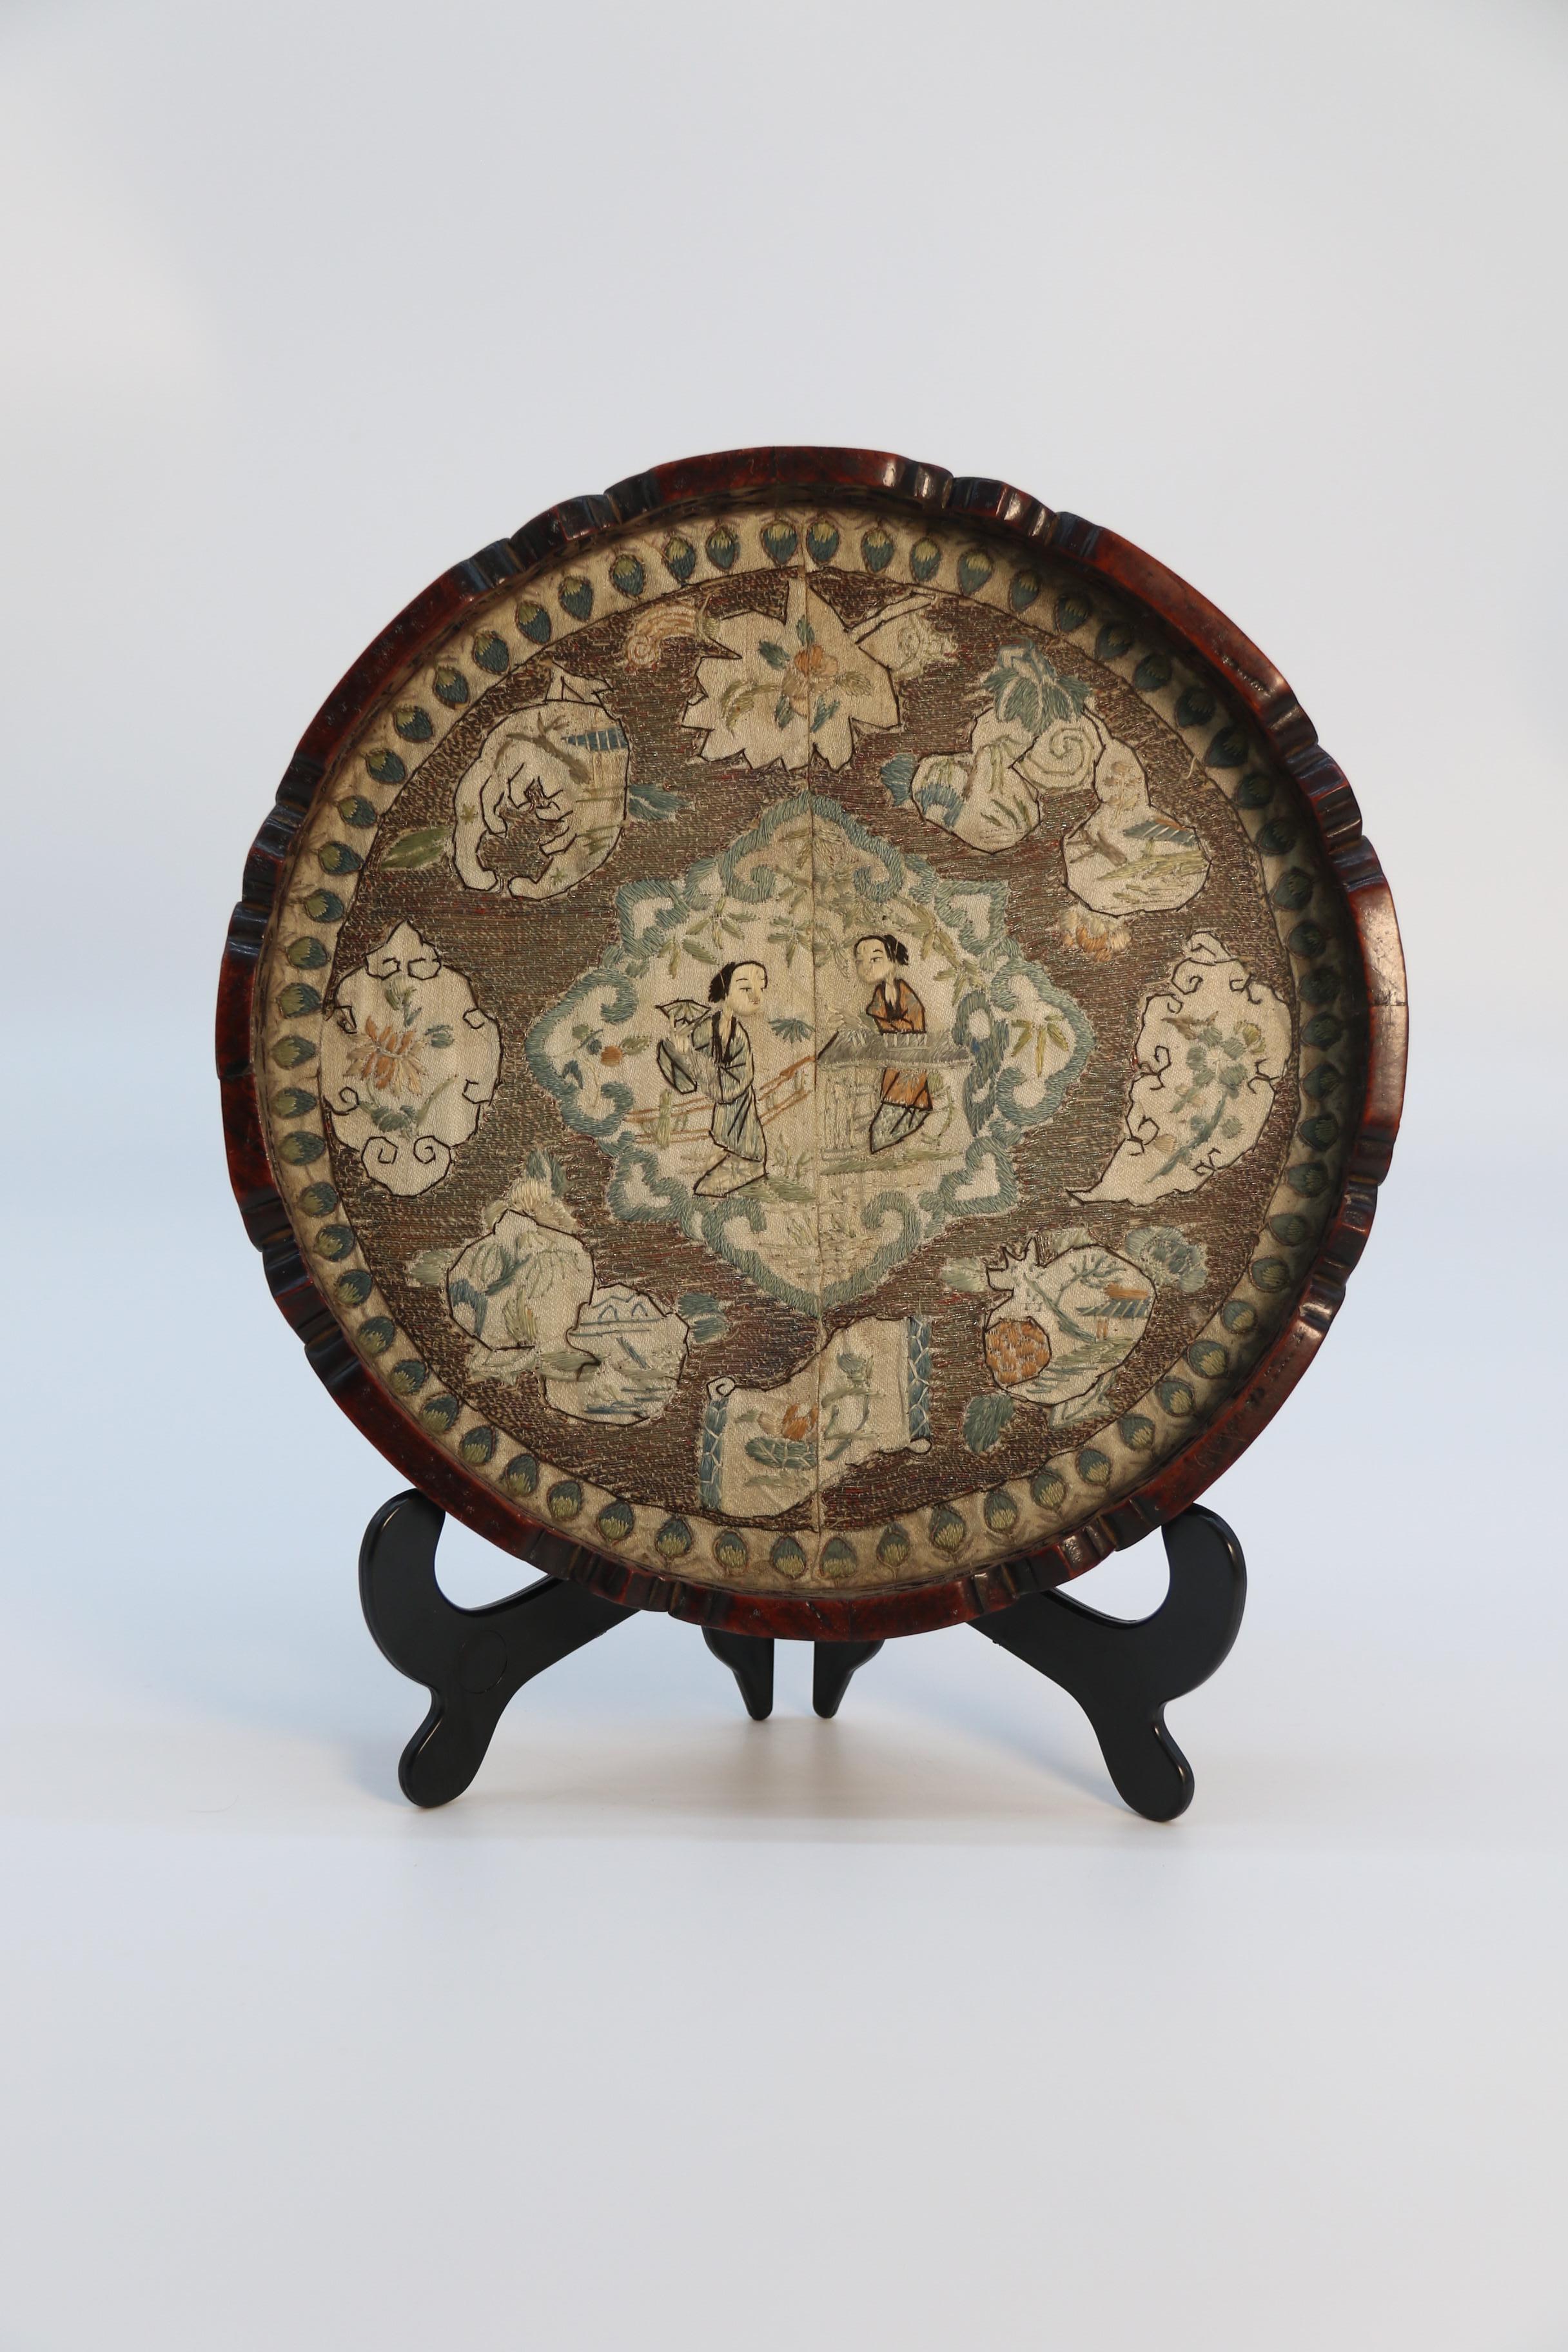 Chinese Carved Hardwood and Silk Embroidered Tray, Circa 1860

This beautiful and decorative piece dates to the mid-19th century. It is a Chinese export item made for the European market. It is of circular form and has an intricately carved